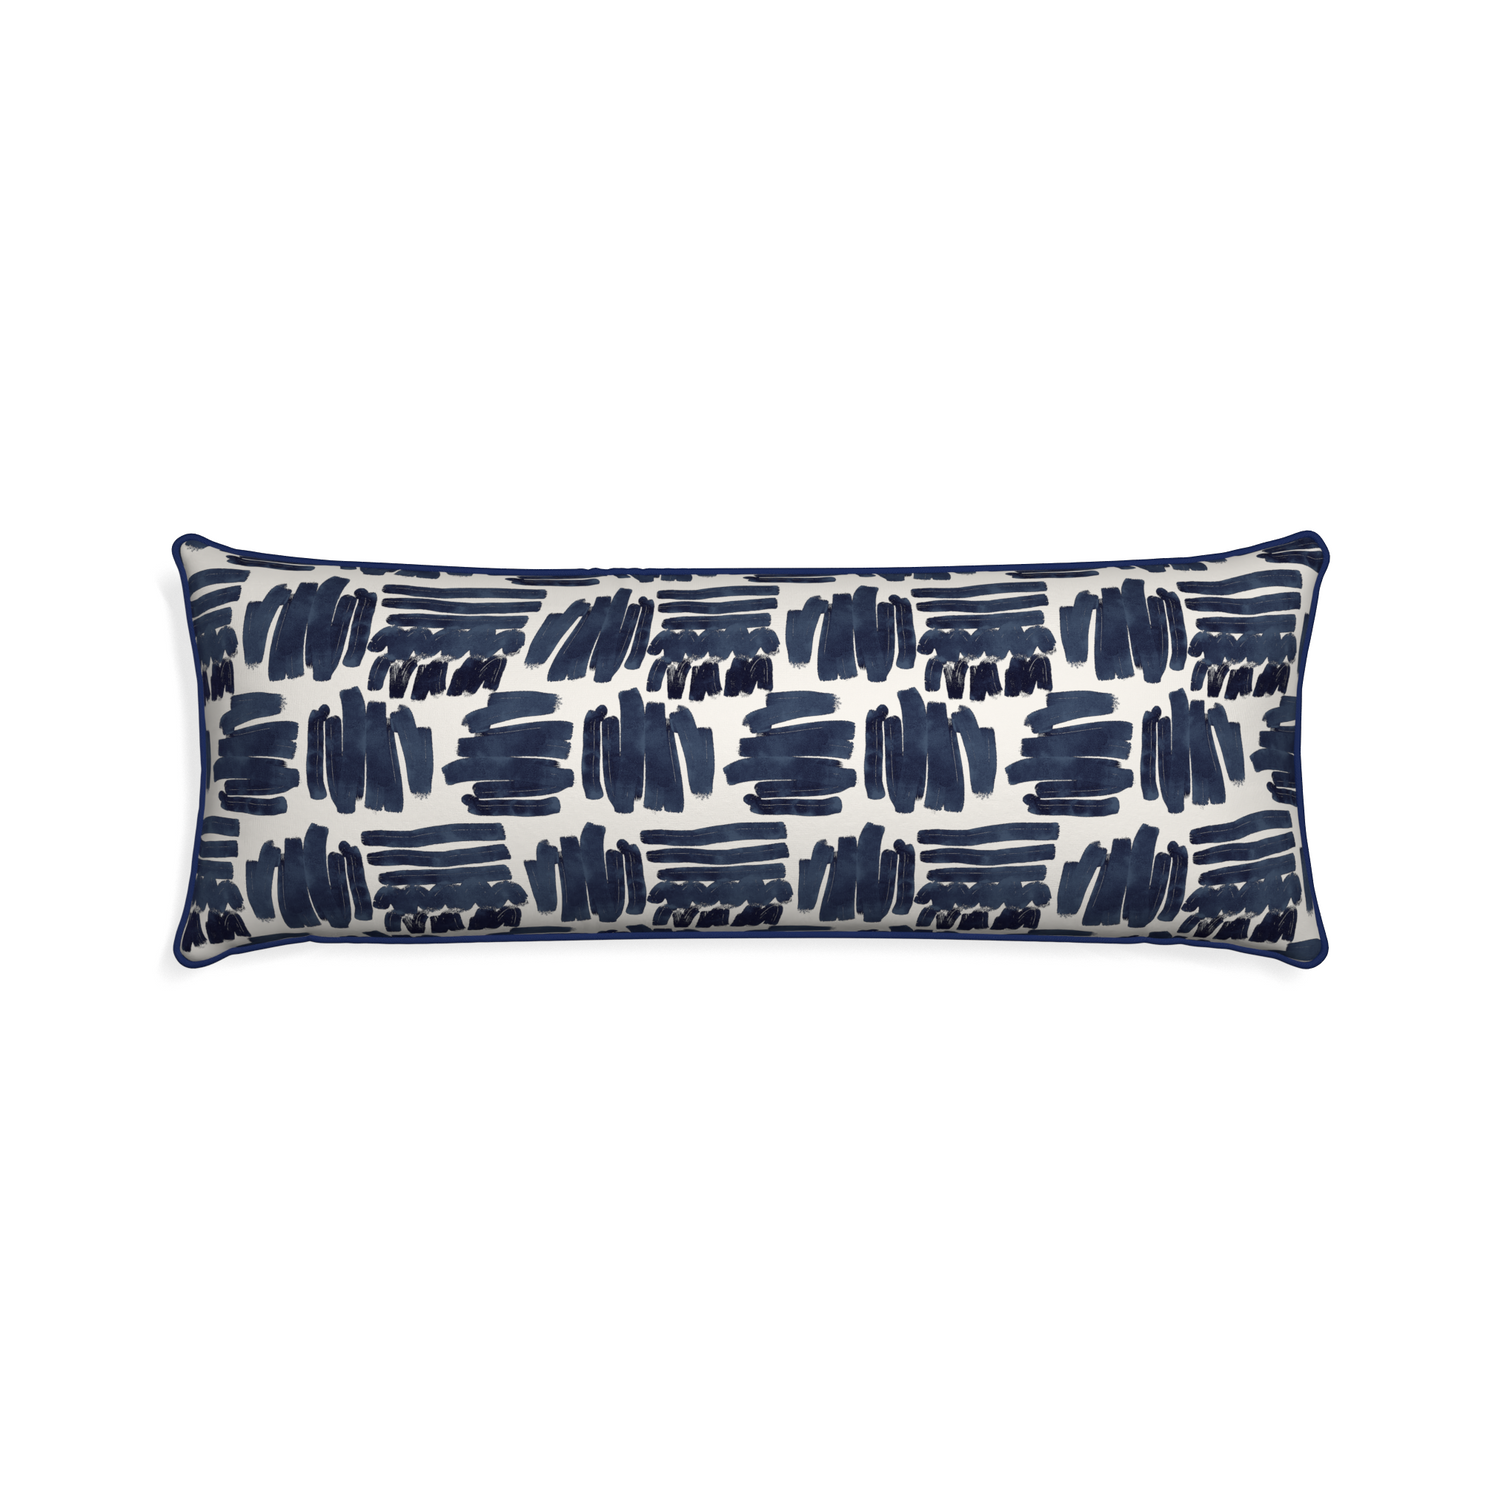 Xl-lumbar warby custom pillow with midnight piping on white background